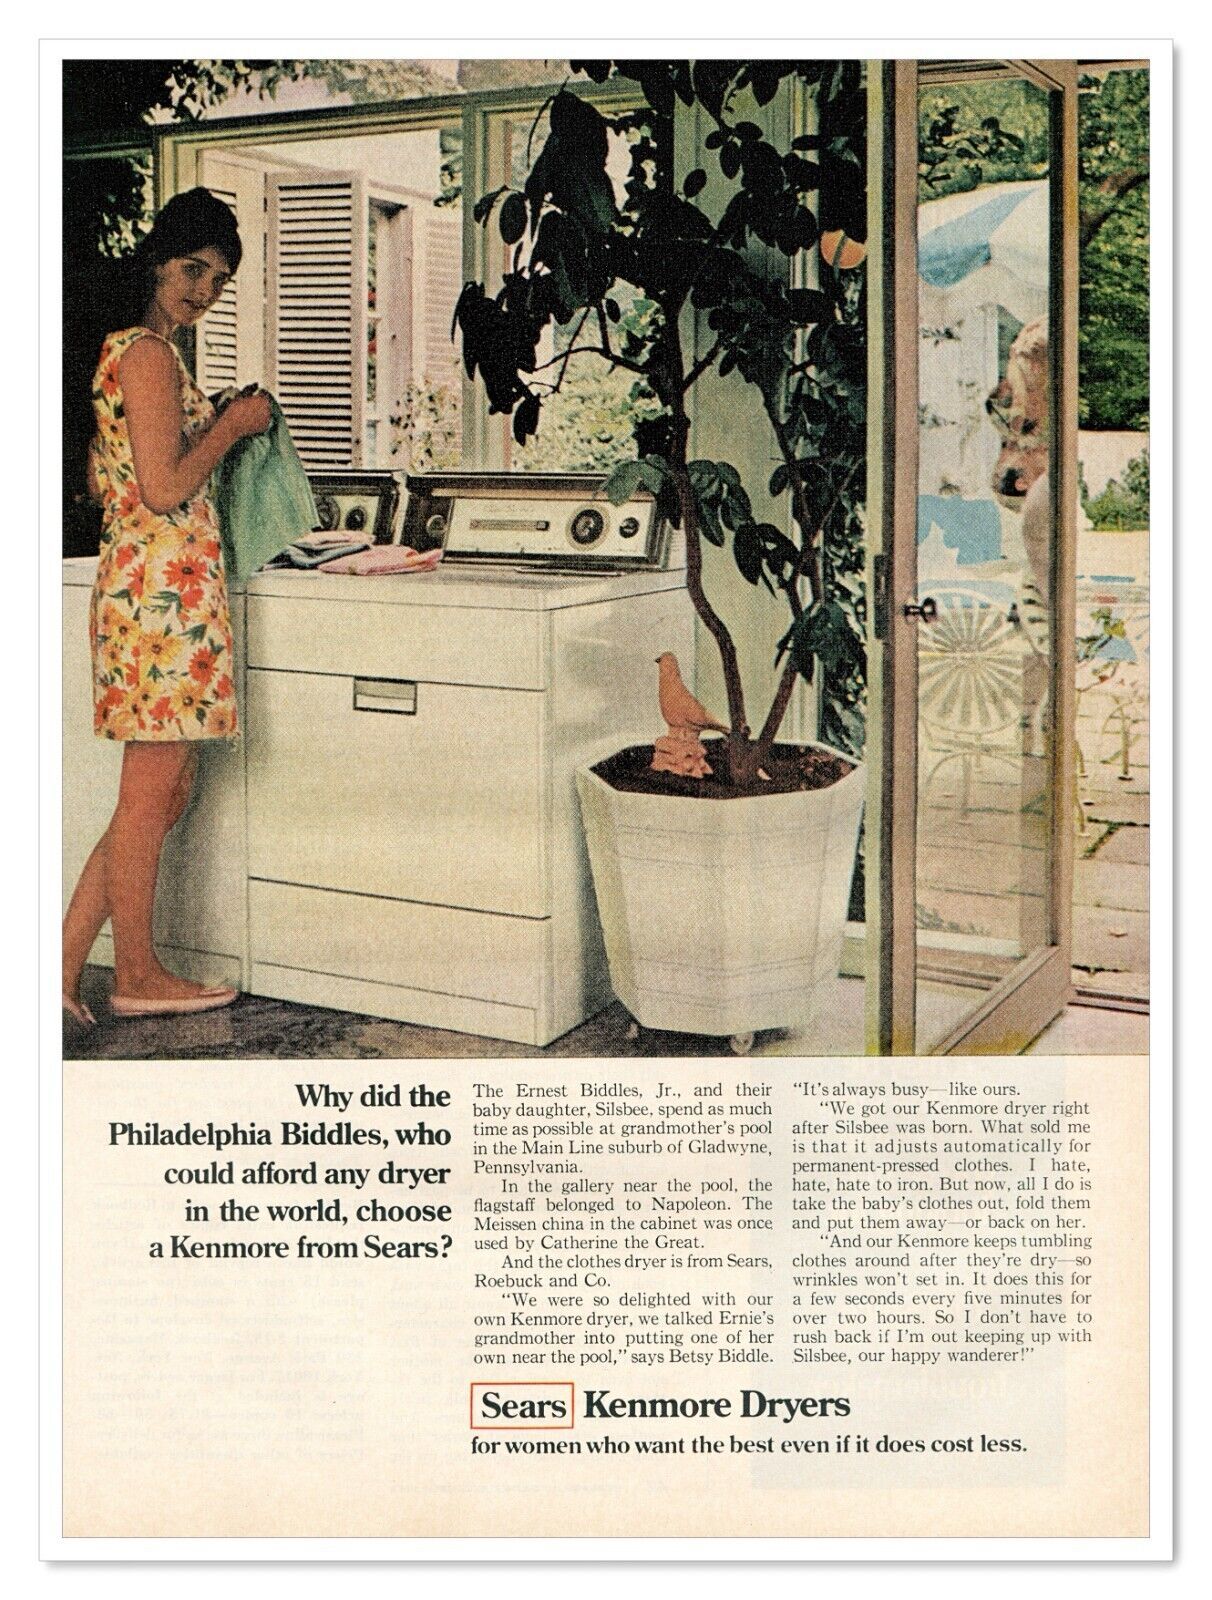 Primary image for Sears Kenmore Dryers Philadelphia Biddles Vintage 1968 Full-Page Magazine Ad